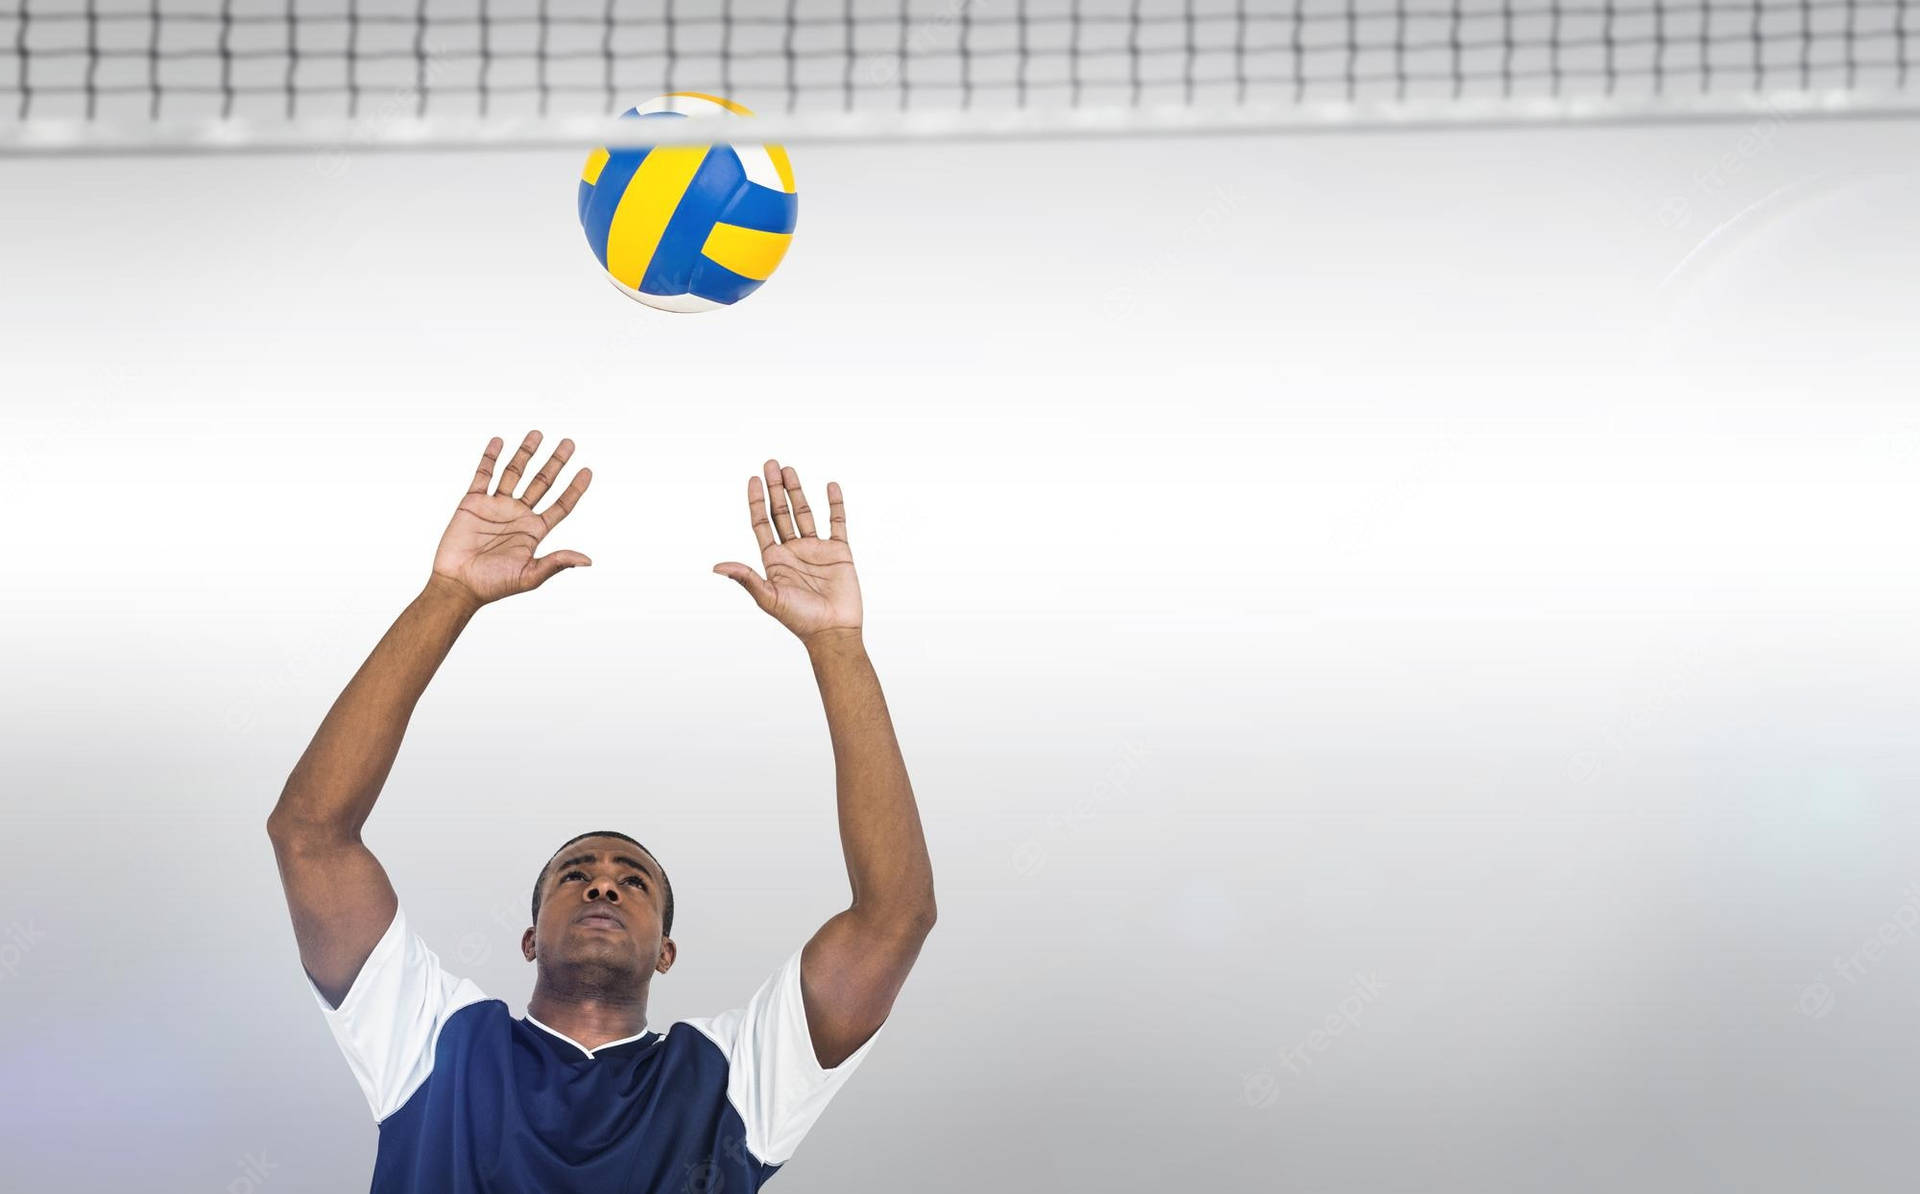 High-tech volleyball for the modern age. Wallpaper